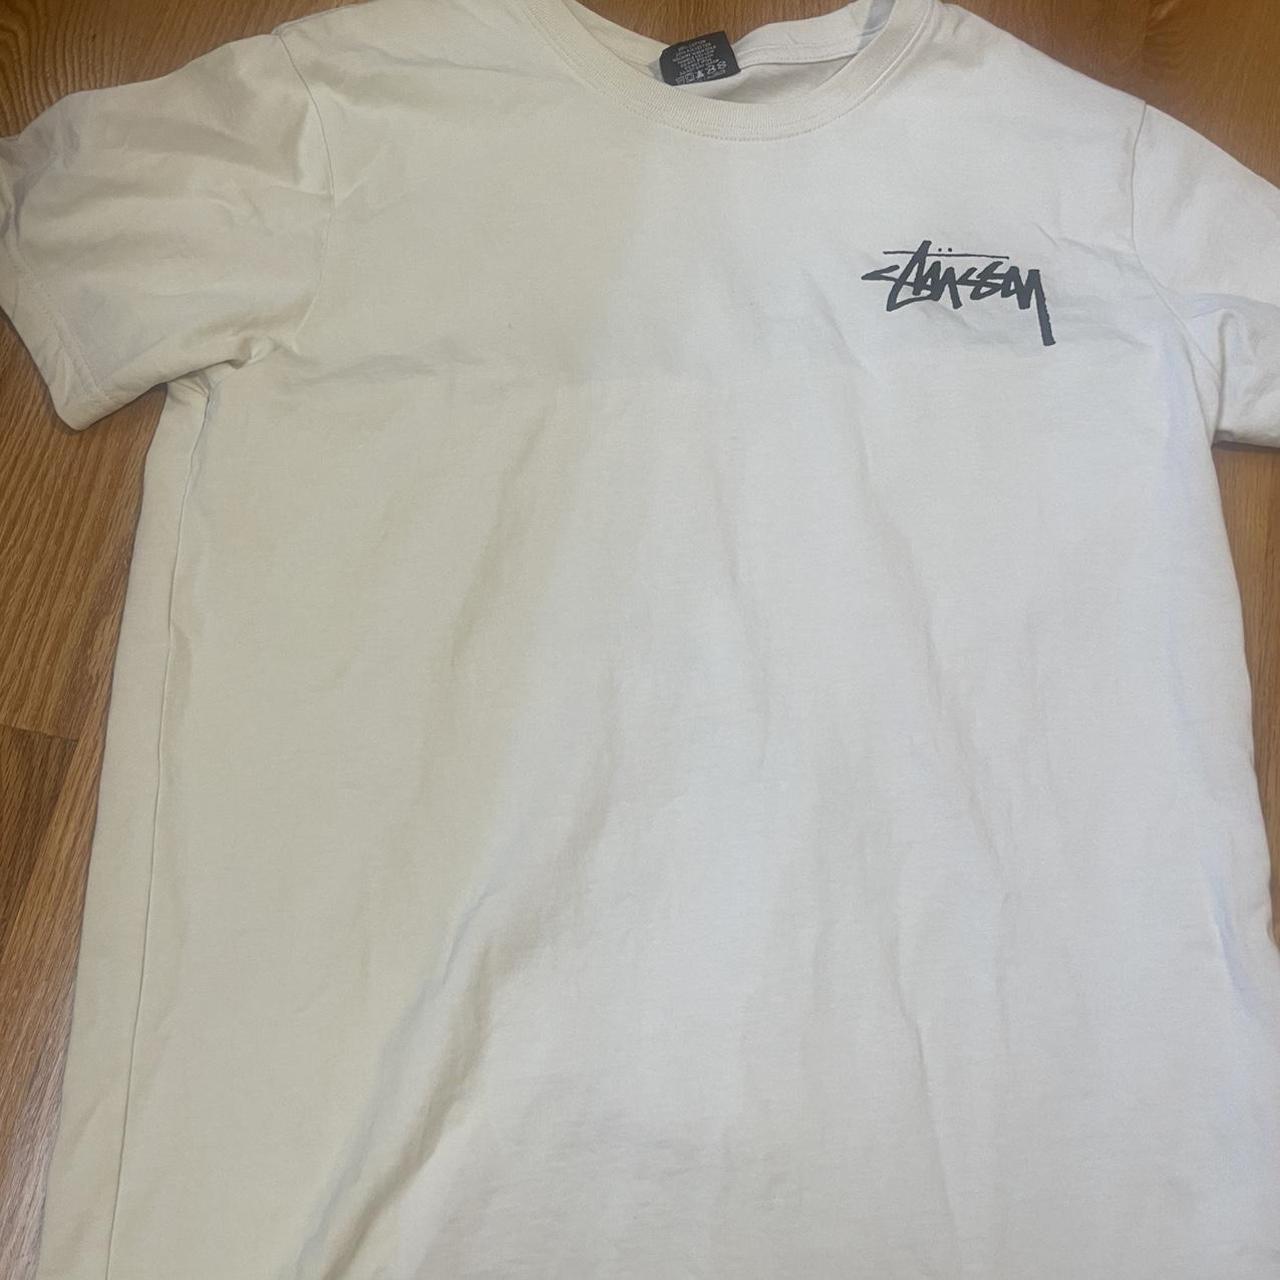 Stussy T-shirt -unisex -barely worn -no flaws -size... - Depop